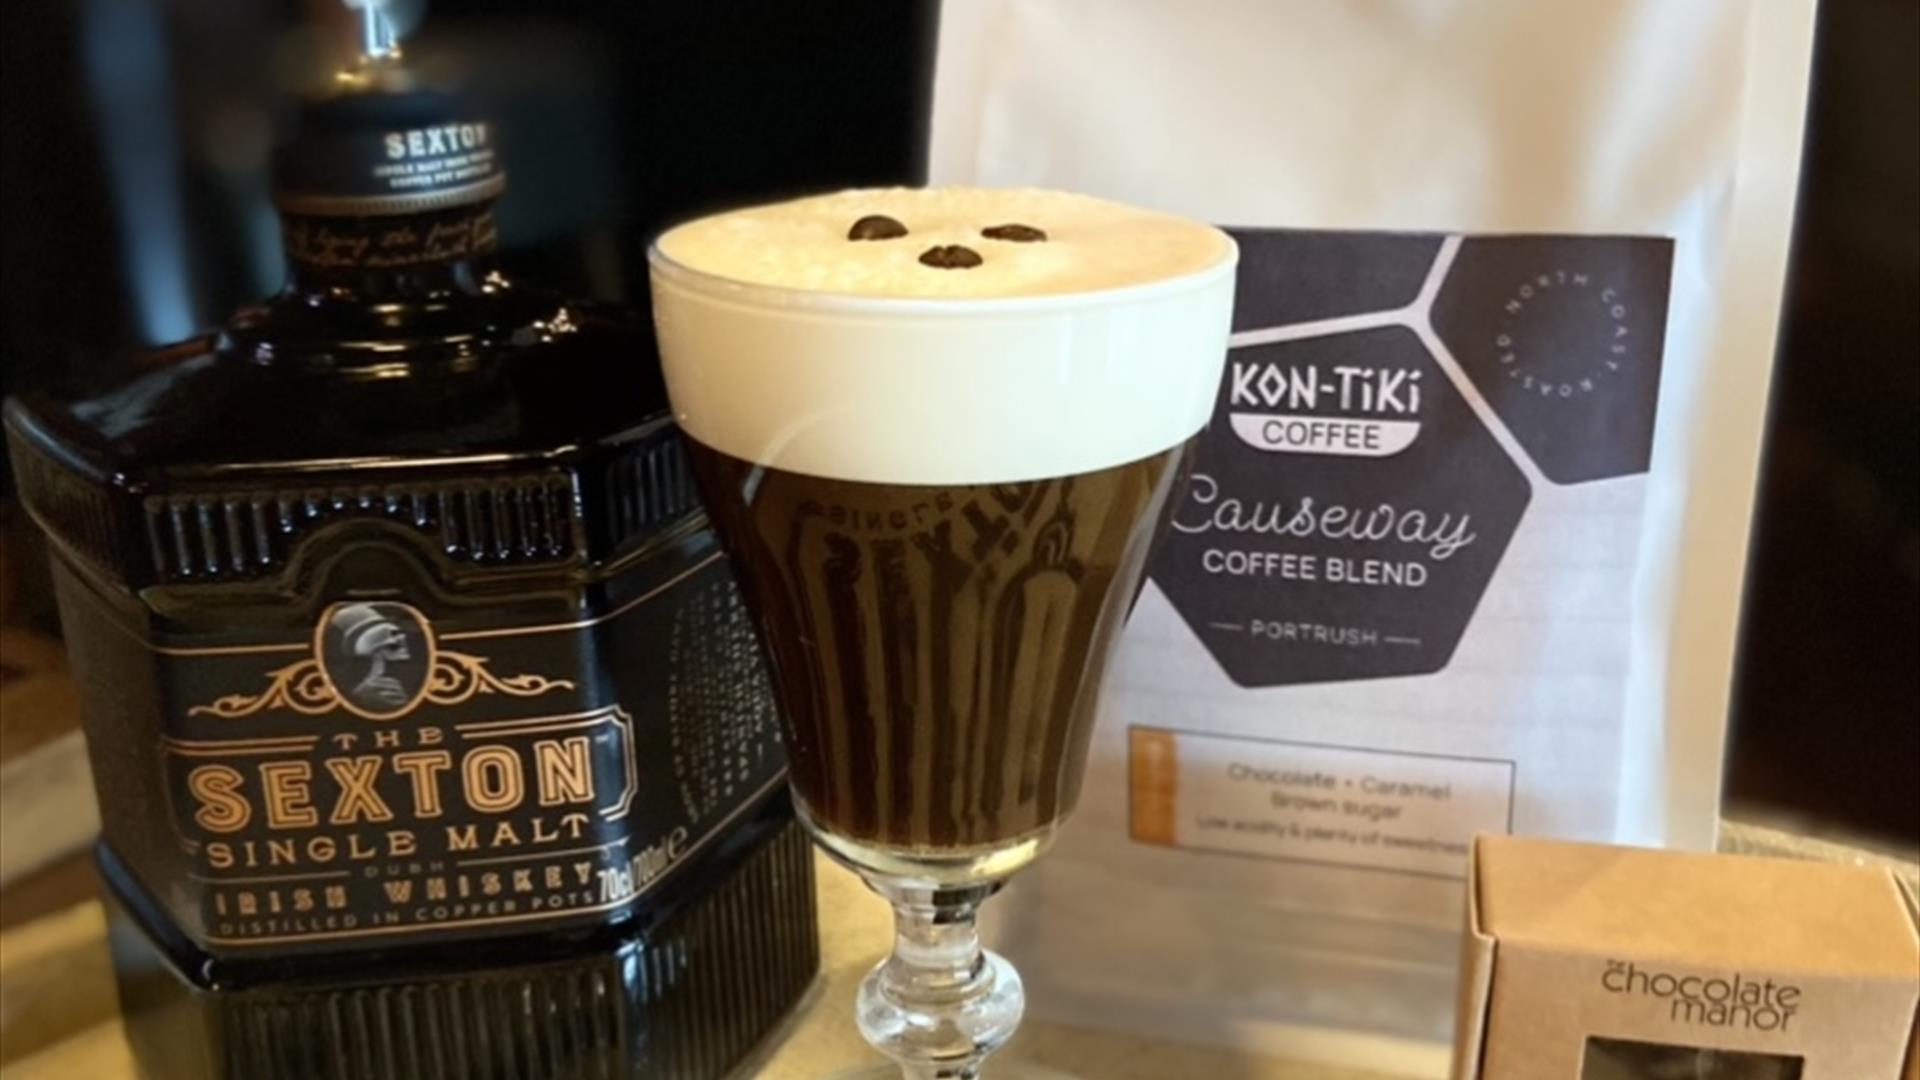 A still life of a bottle of sexton single malt whiskey, an Irish Coffee with 3 coffee beans floating on the cream head, a pack of Kon-Tiki Causeway Co